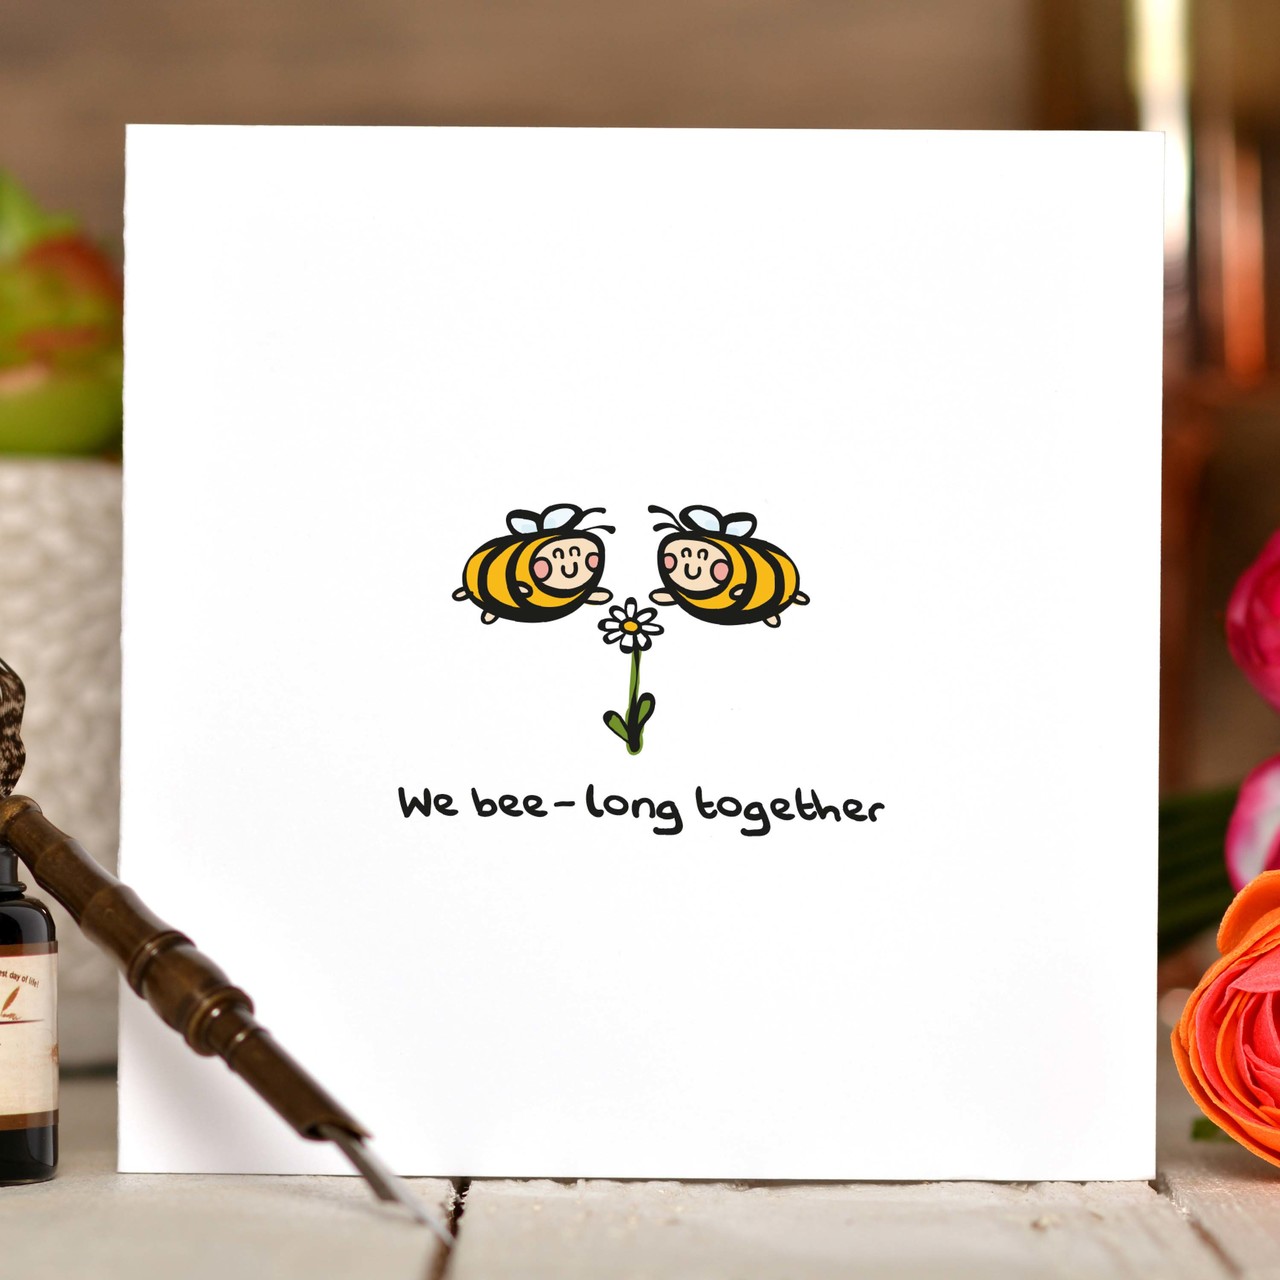 We bee-long together Card